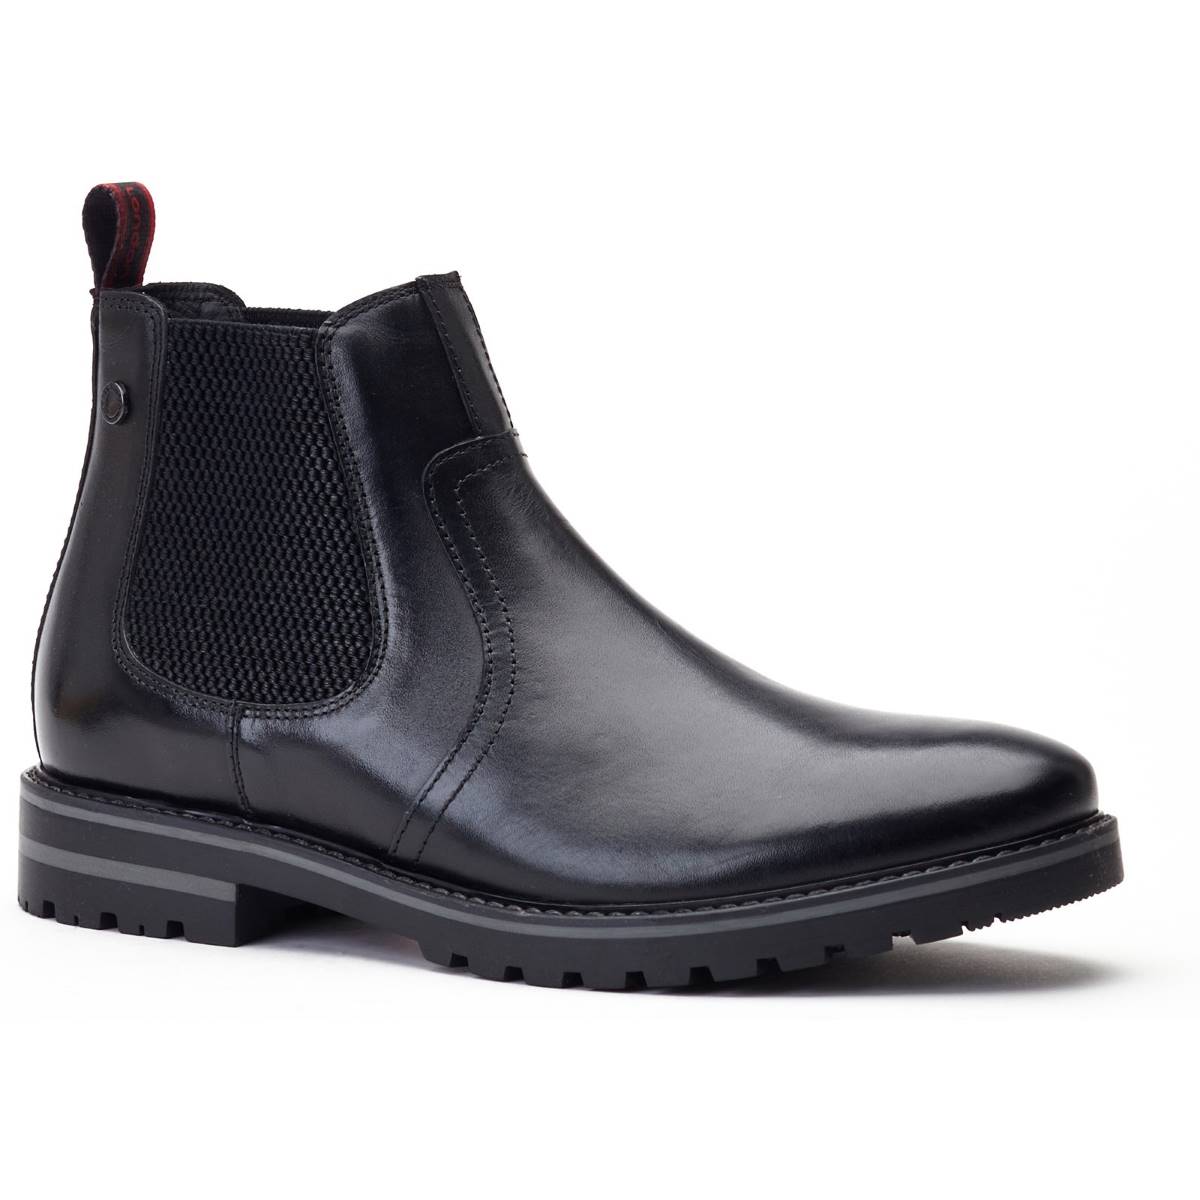 Base London Cutler Waxy Black Mens boots XD04010 in a Plain Leather in Size 7